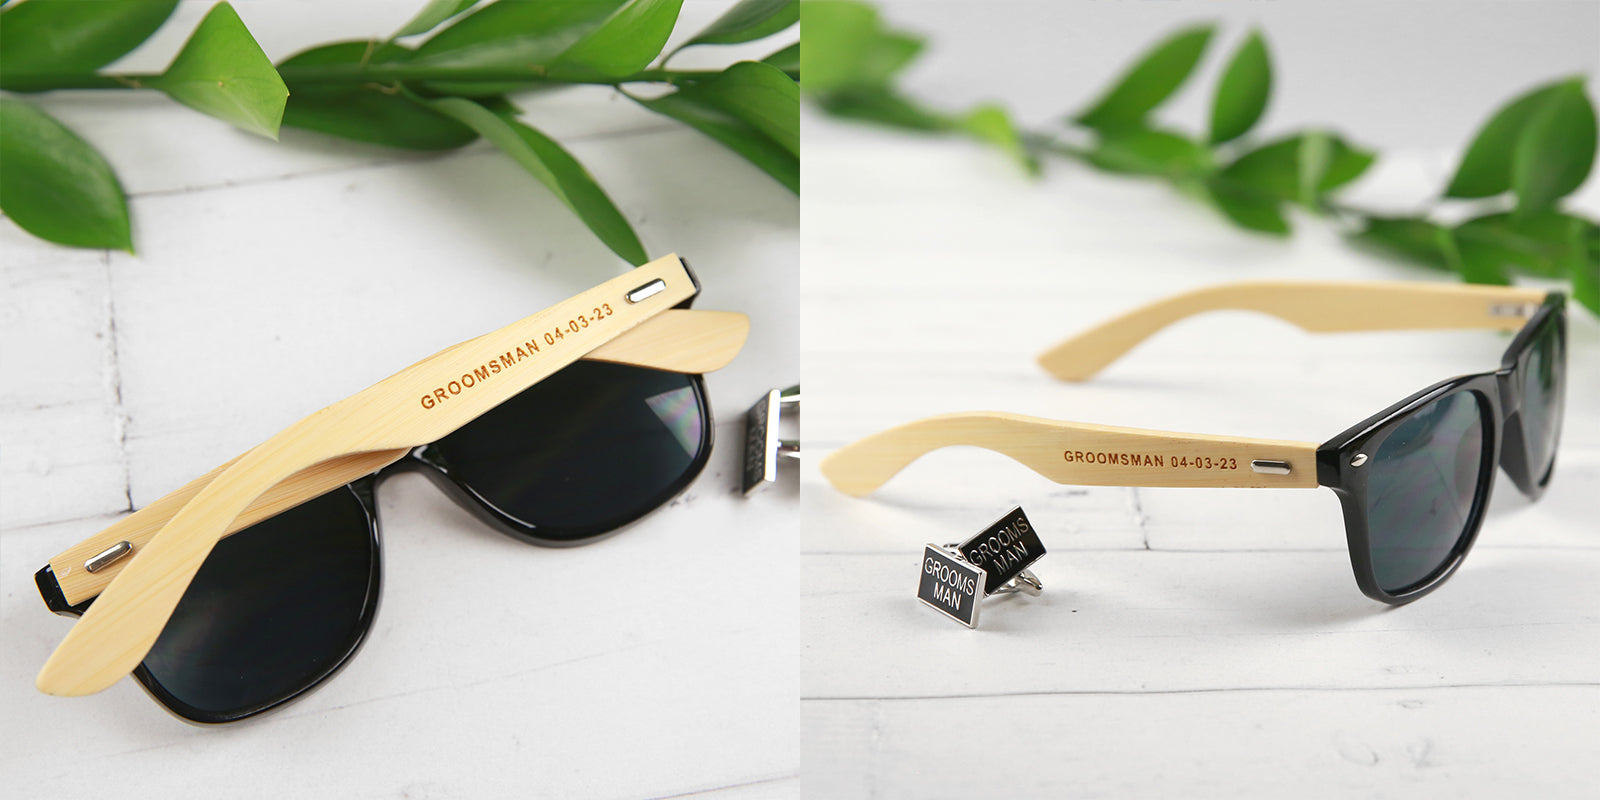 Engraved wooden sunglasses